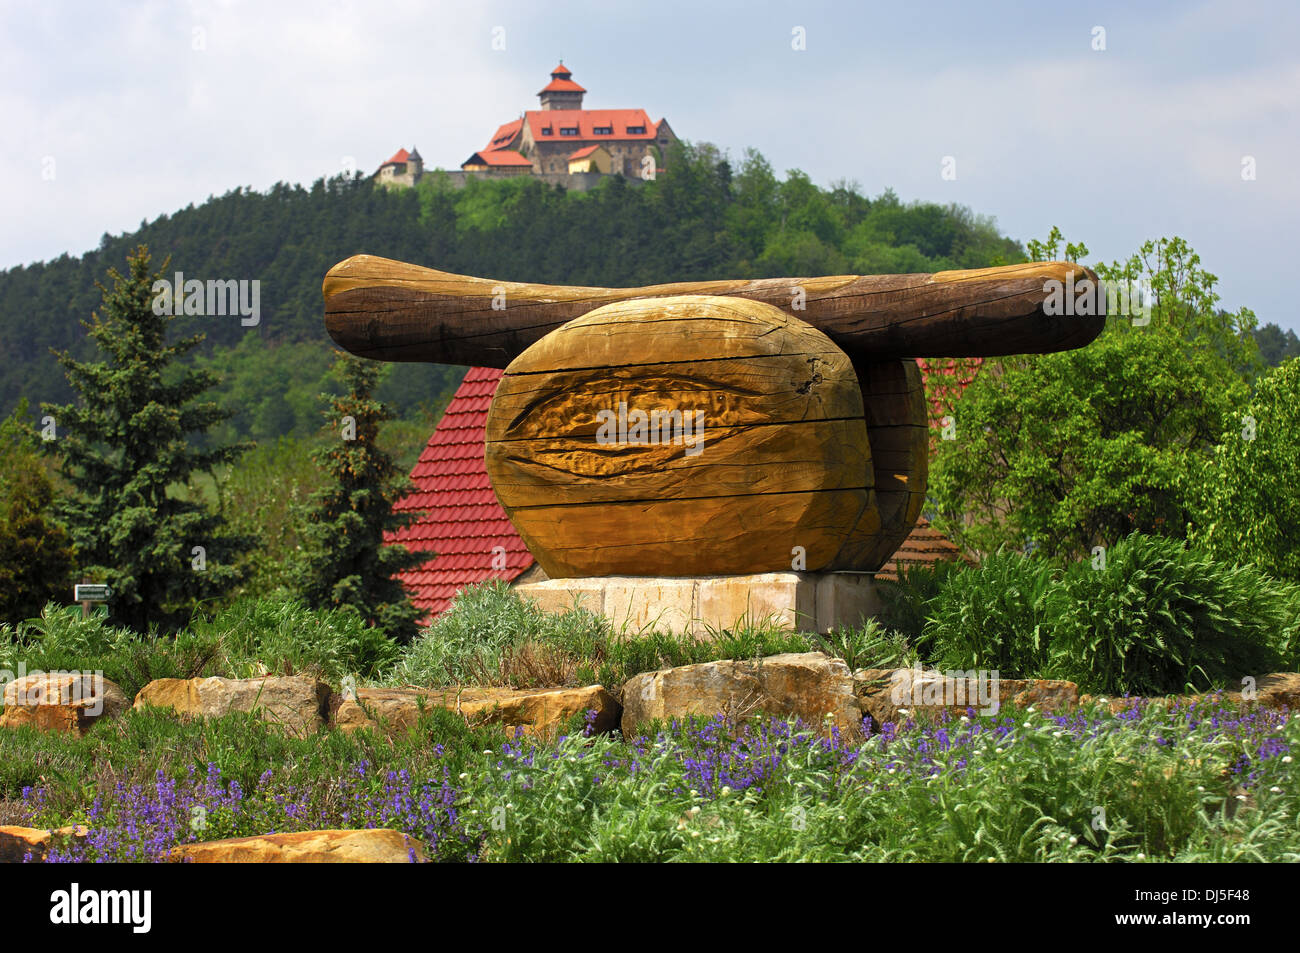 Wooden monument of a fried sausage, Germany Stock Photo